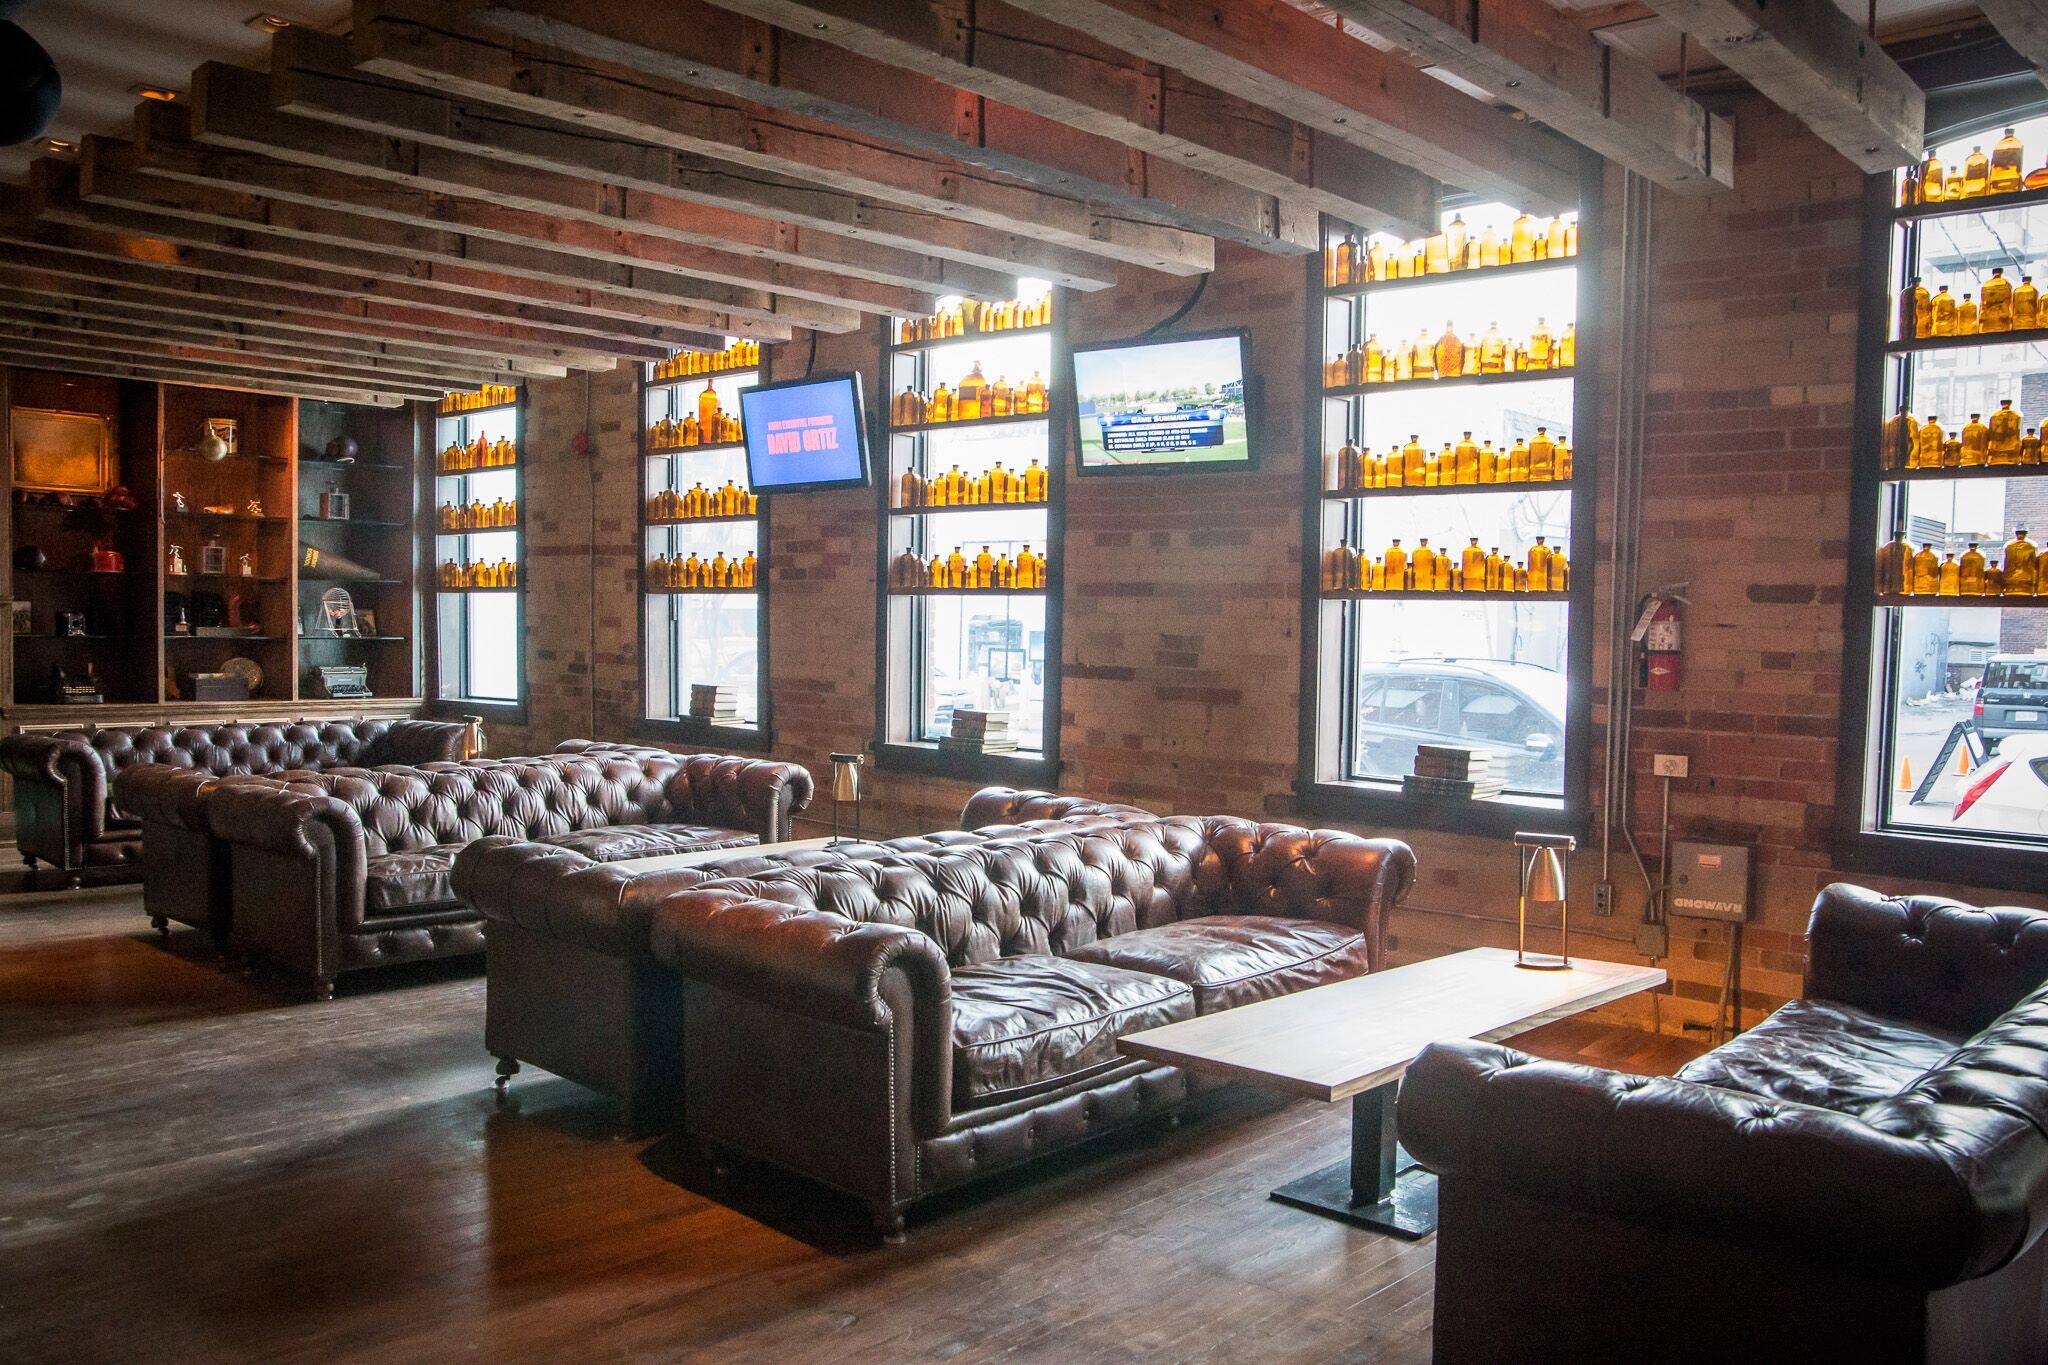 Popular downtown Toronto bar closes to make way for new concept space